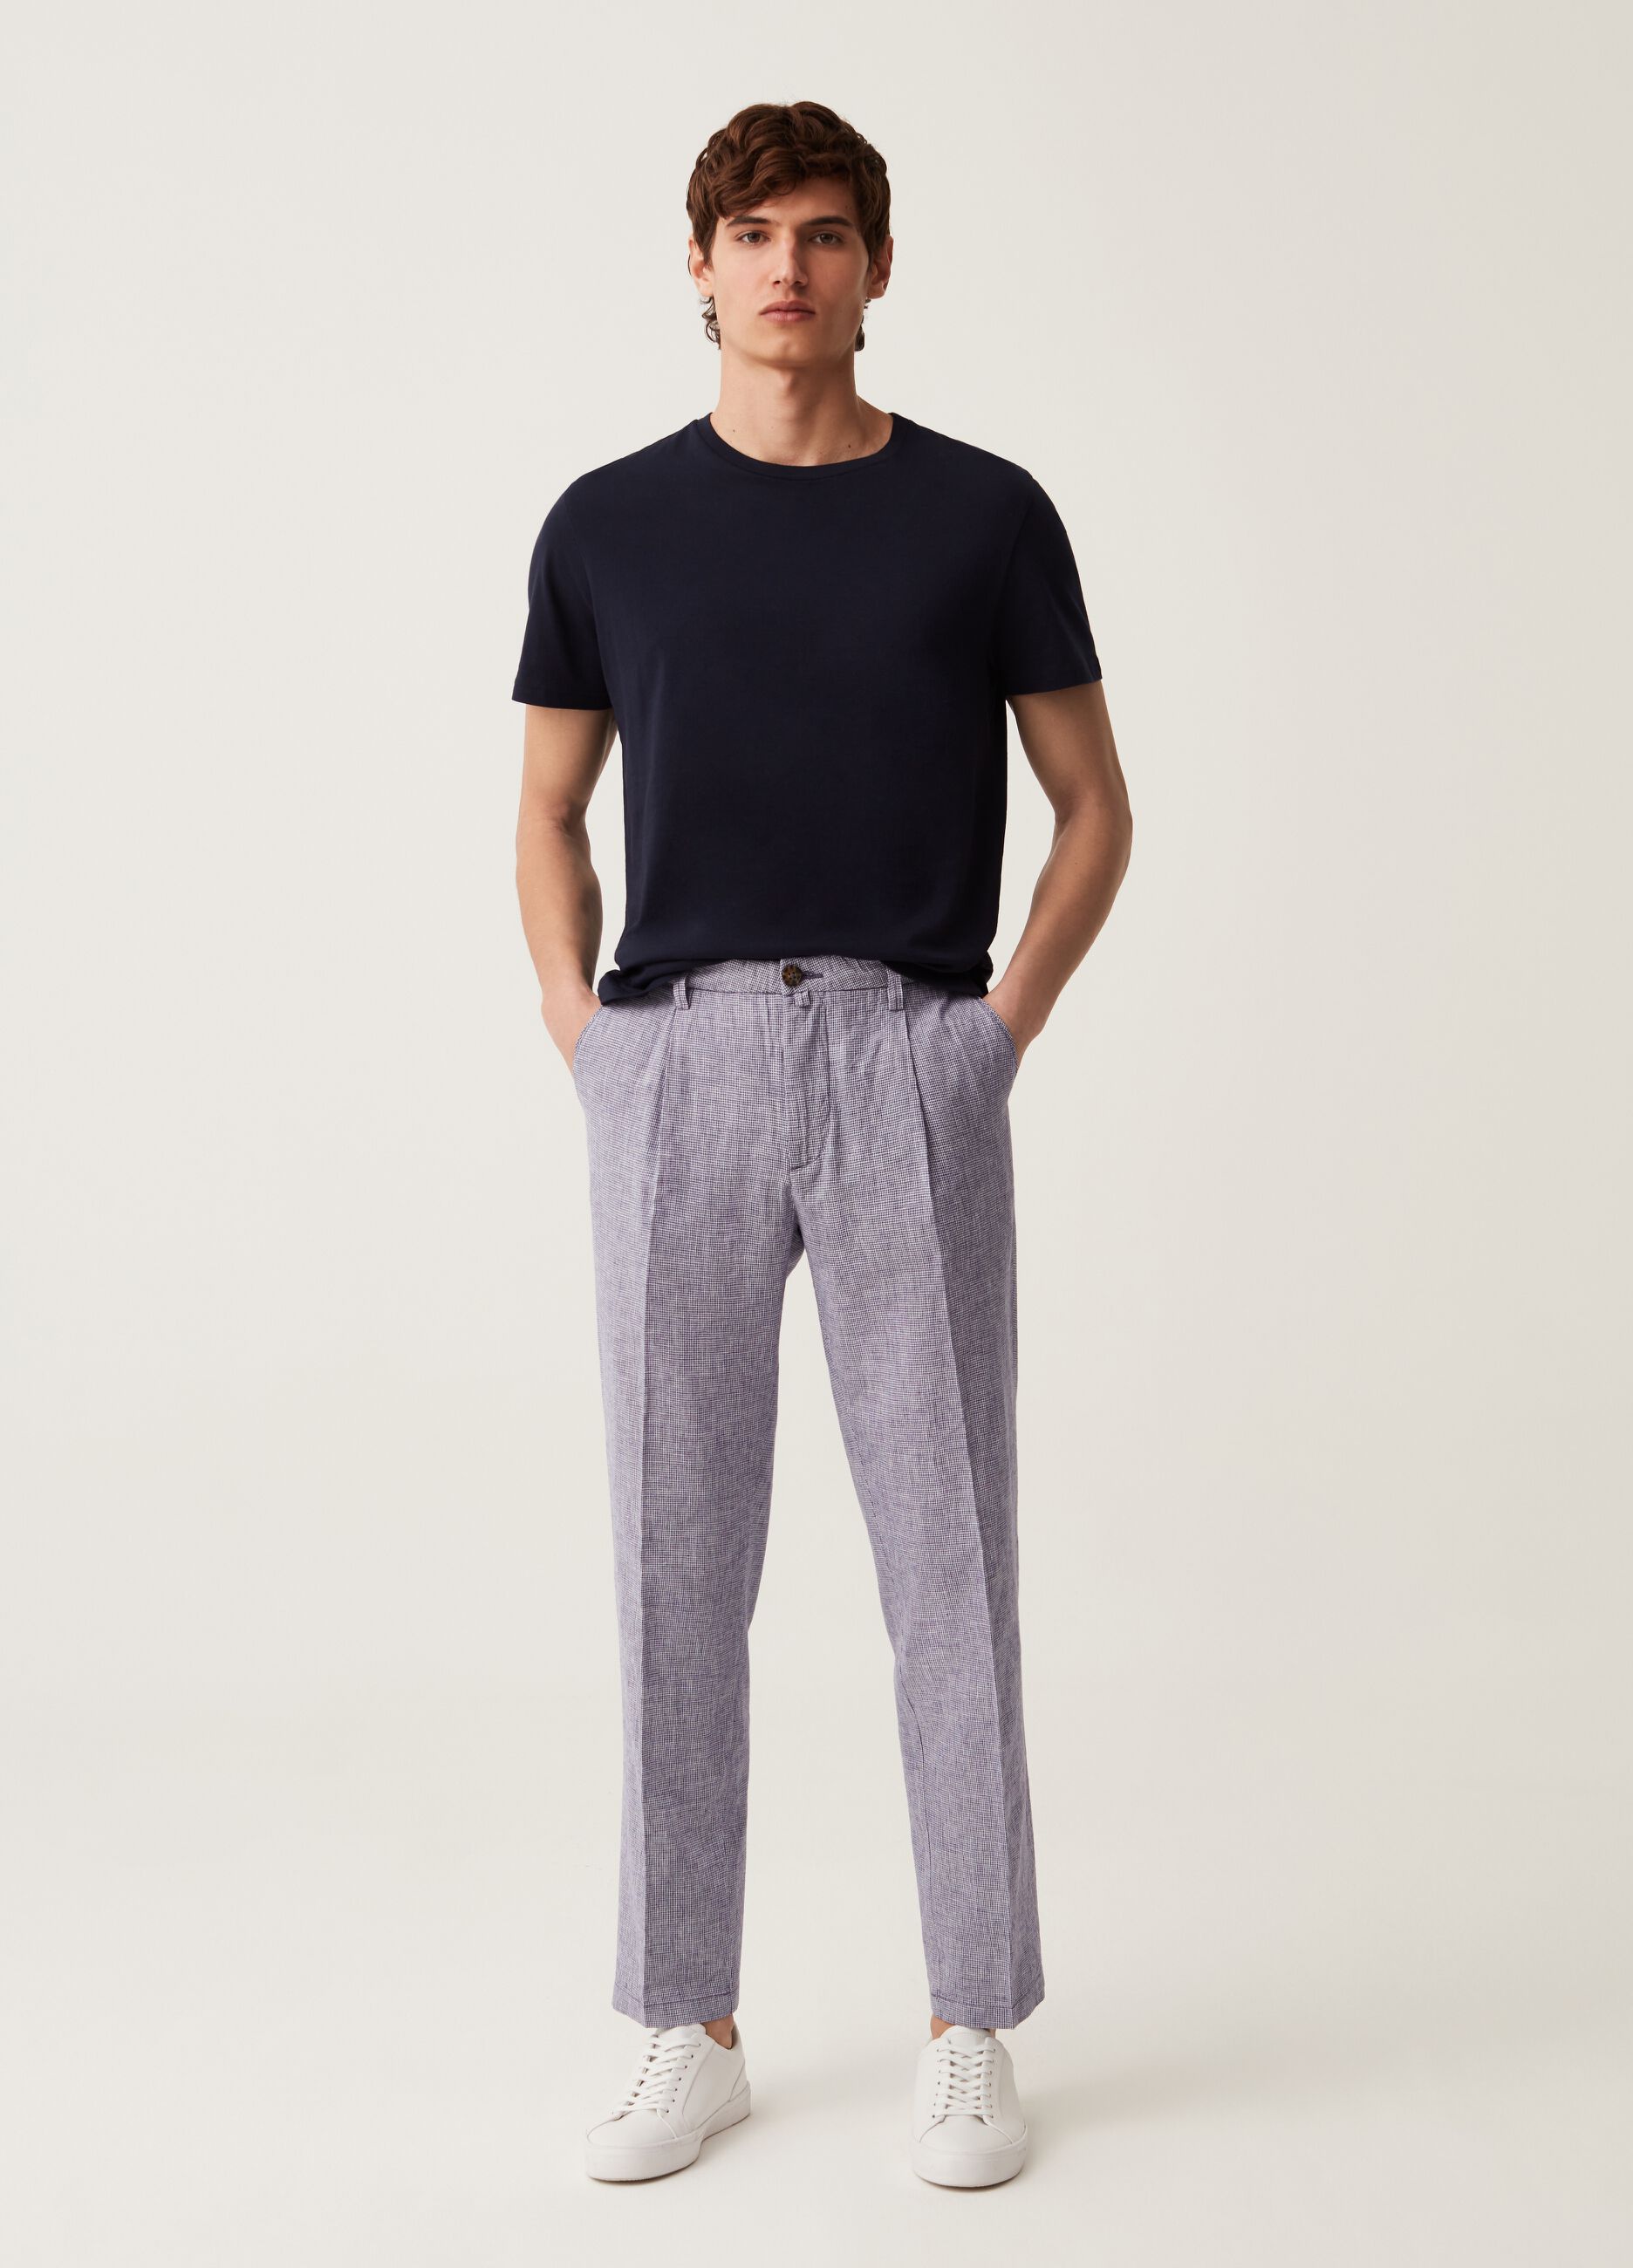 Men Charcoal Grey Slim Fit Chino Trousers  Buy Men Charcoal Grey Slim Fit Chino  Trousers online in India